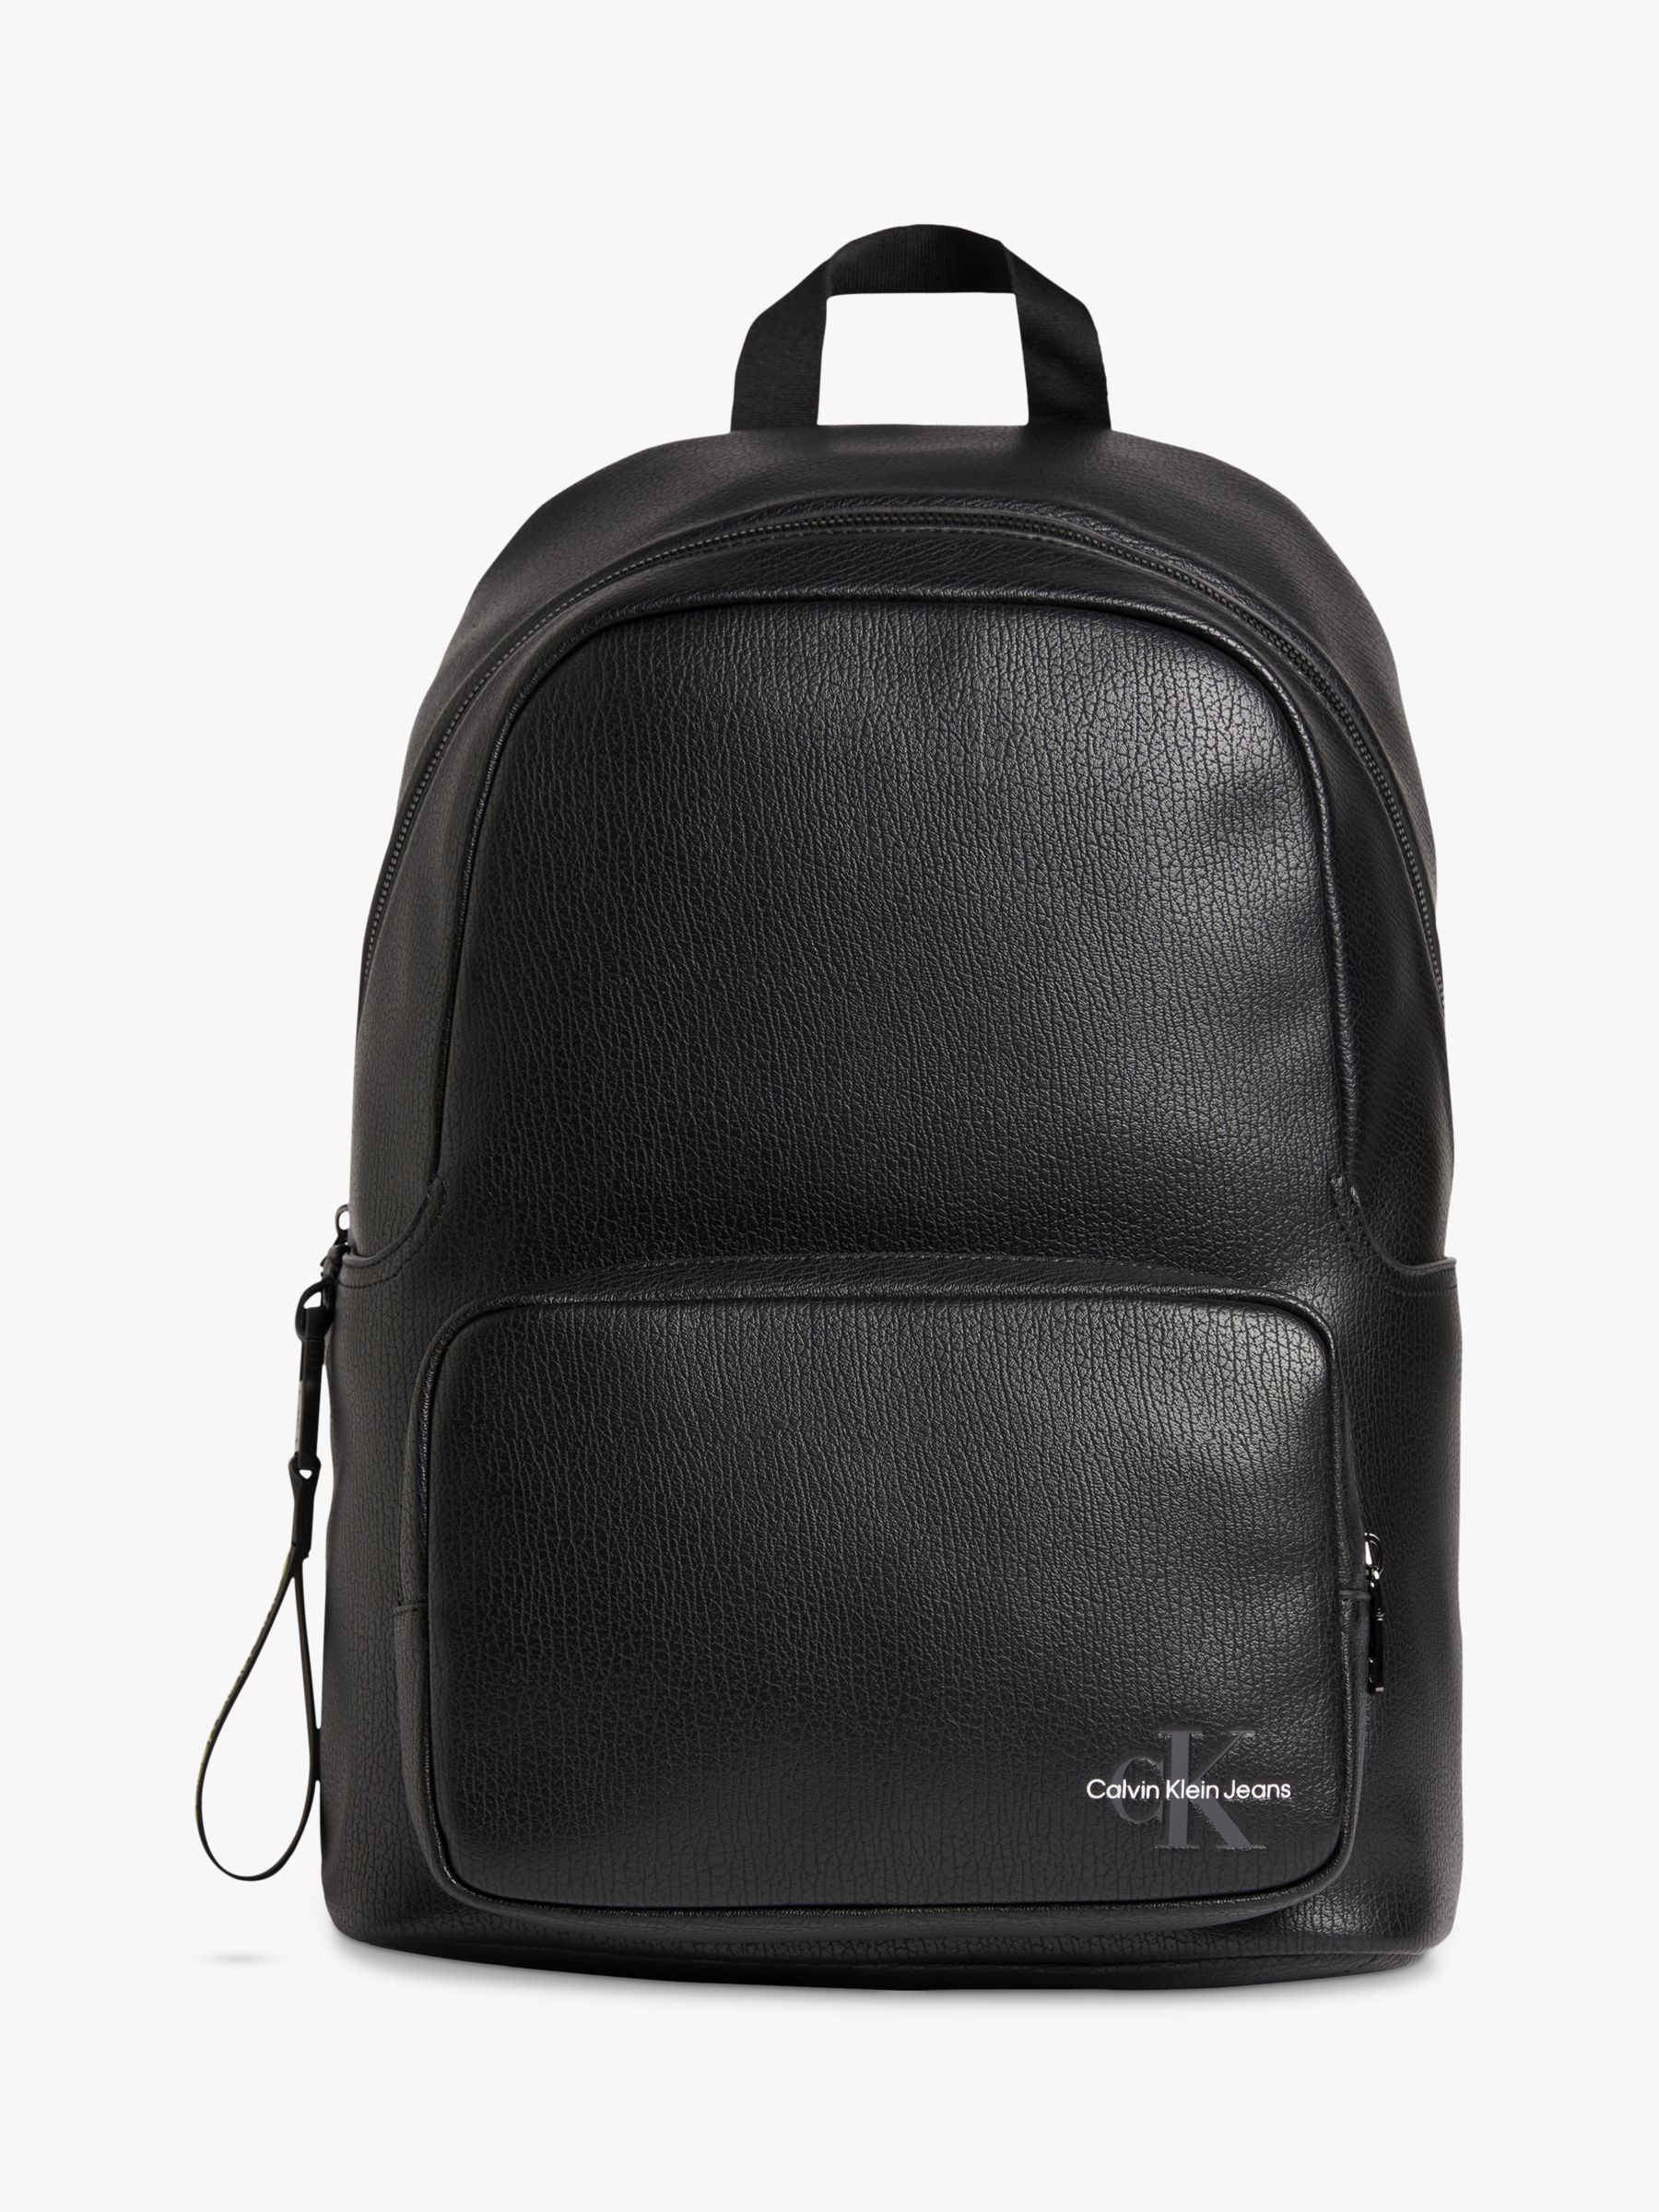 Calvin Klein Tagged Campus Backpack, Black